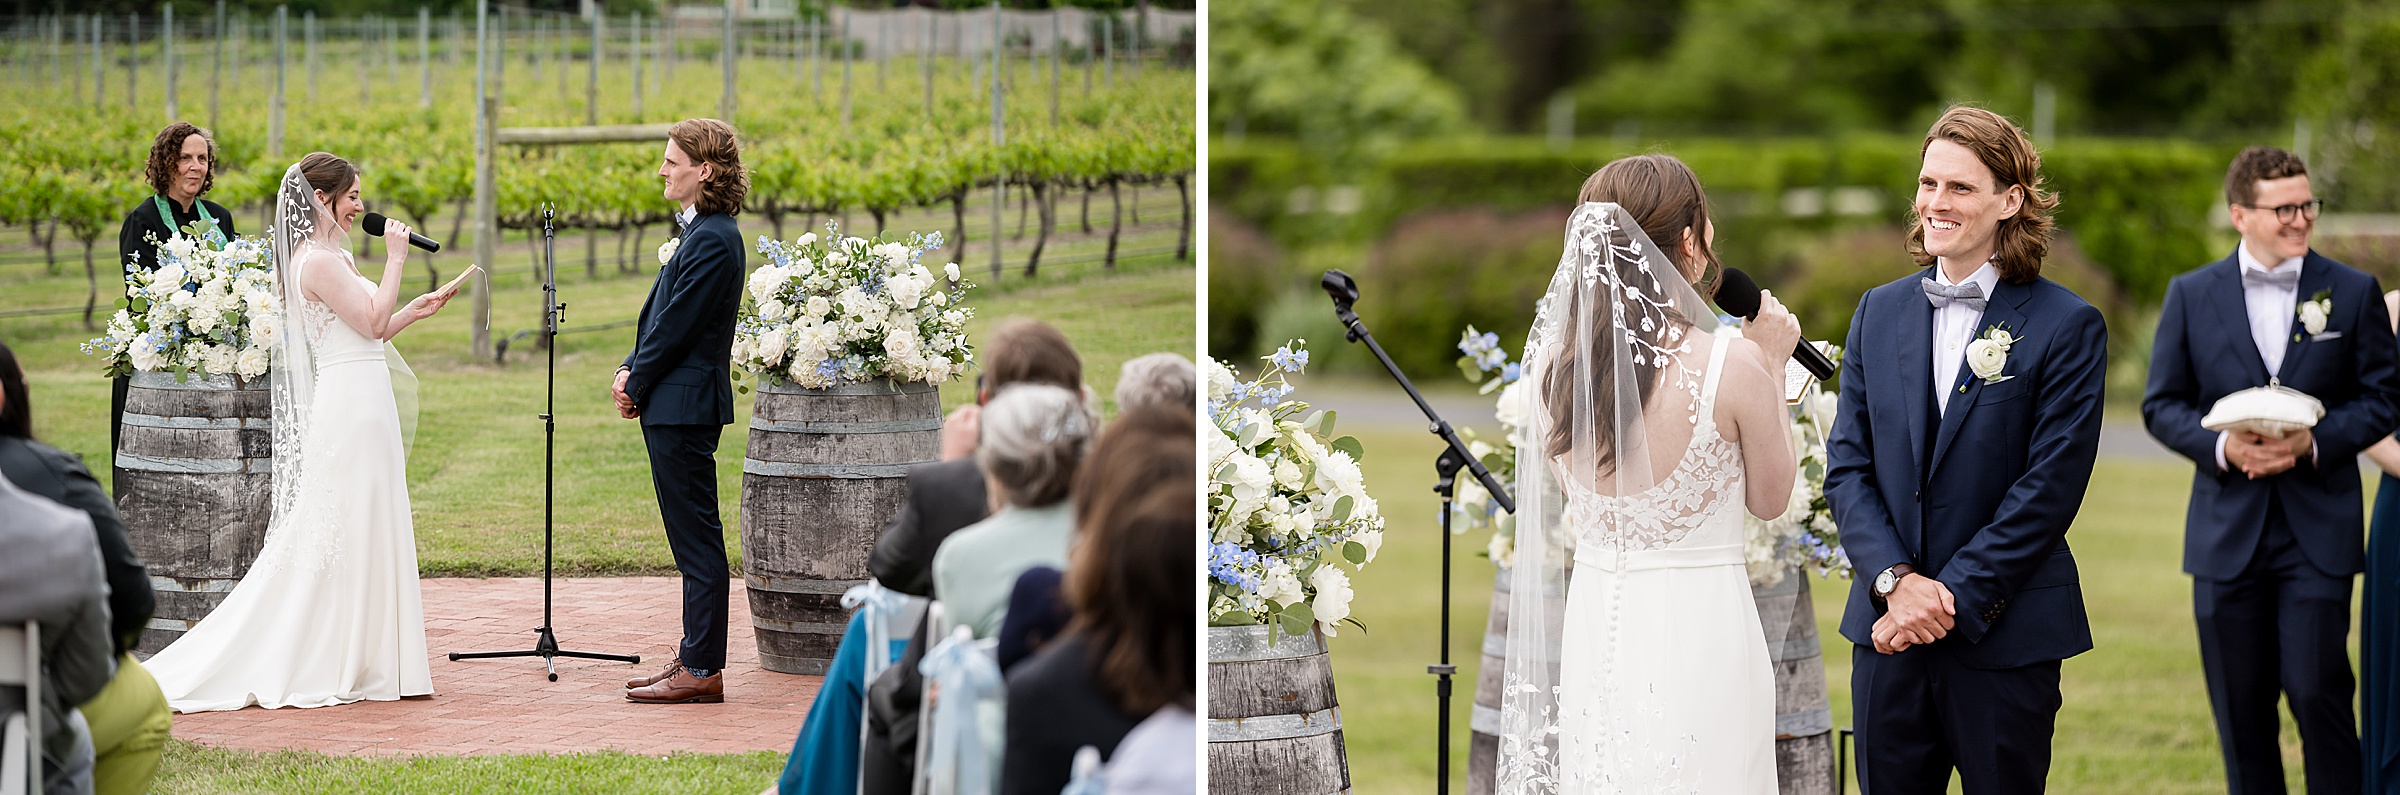 A bride and groom stand facing each other during their outdoor wedding ceremony near a vineyard. The bride is speaking into a microphone while the groom and officiant look on.